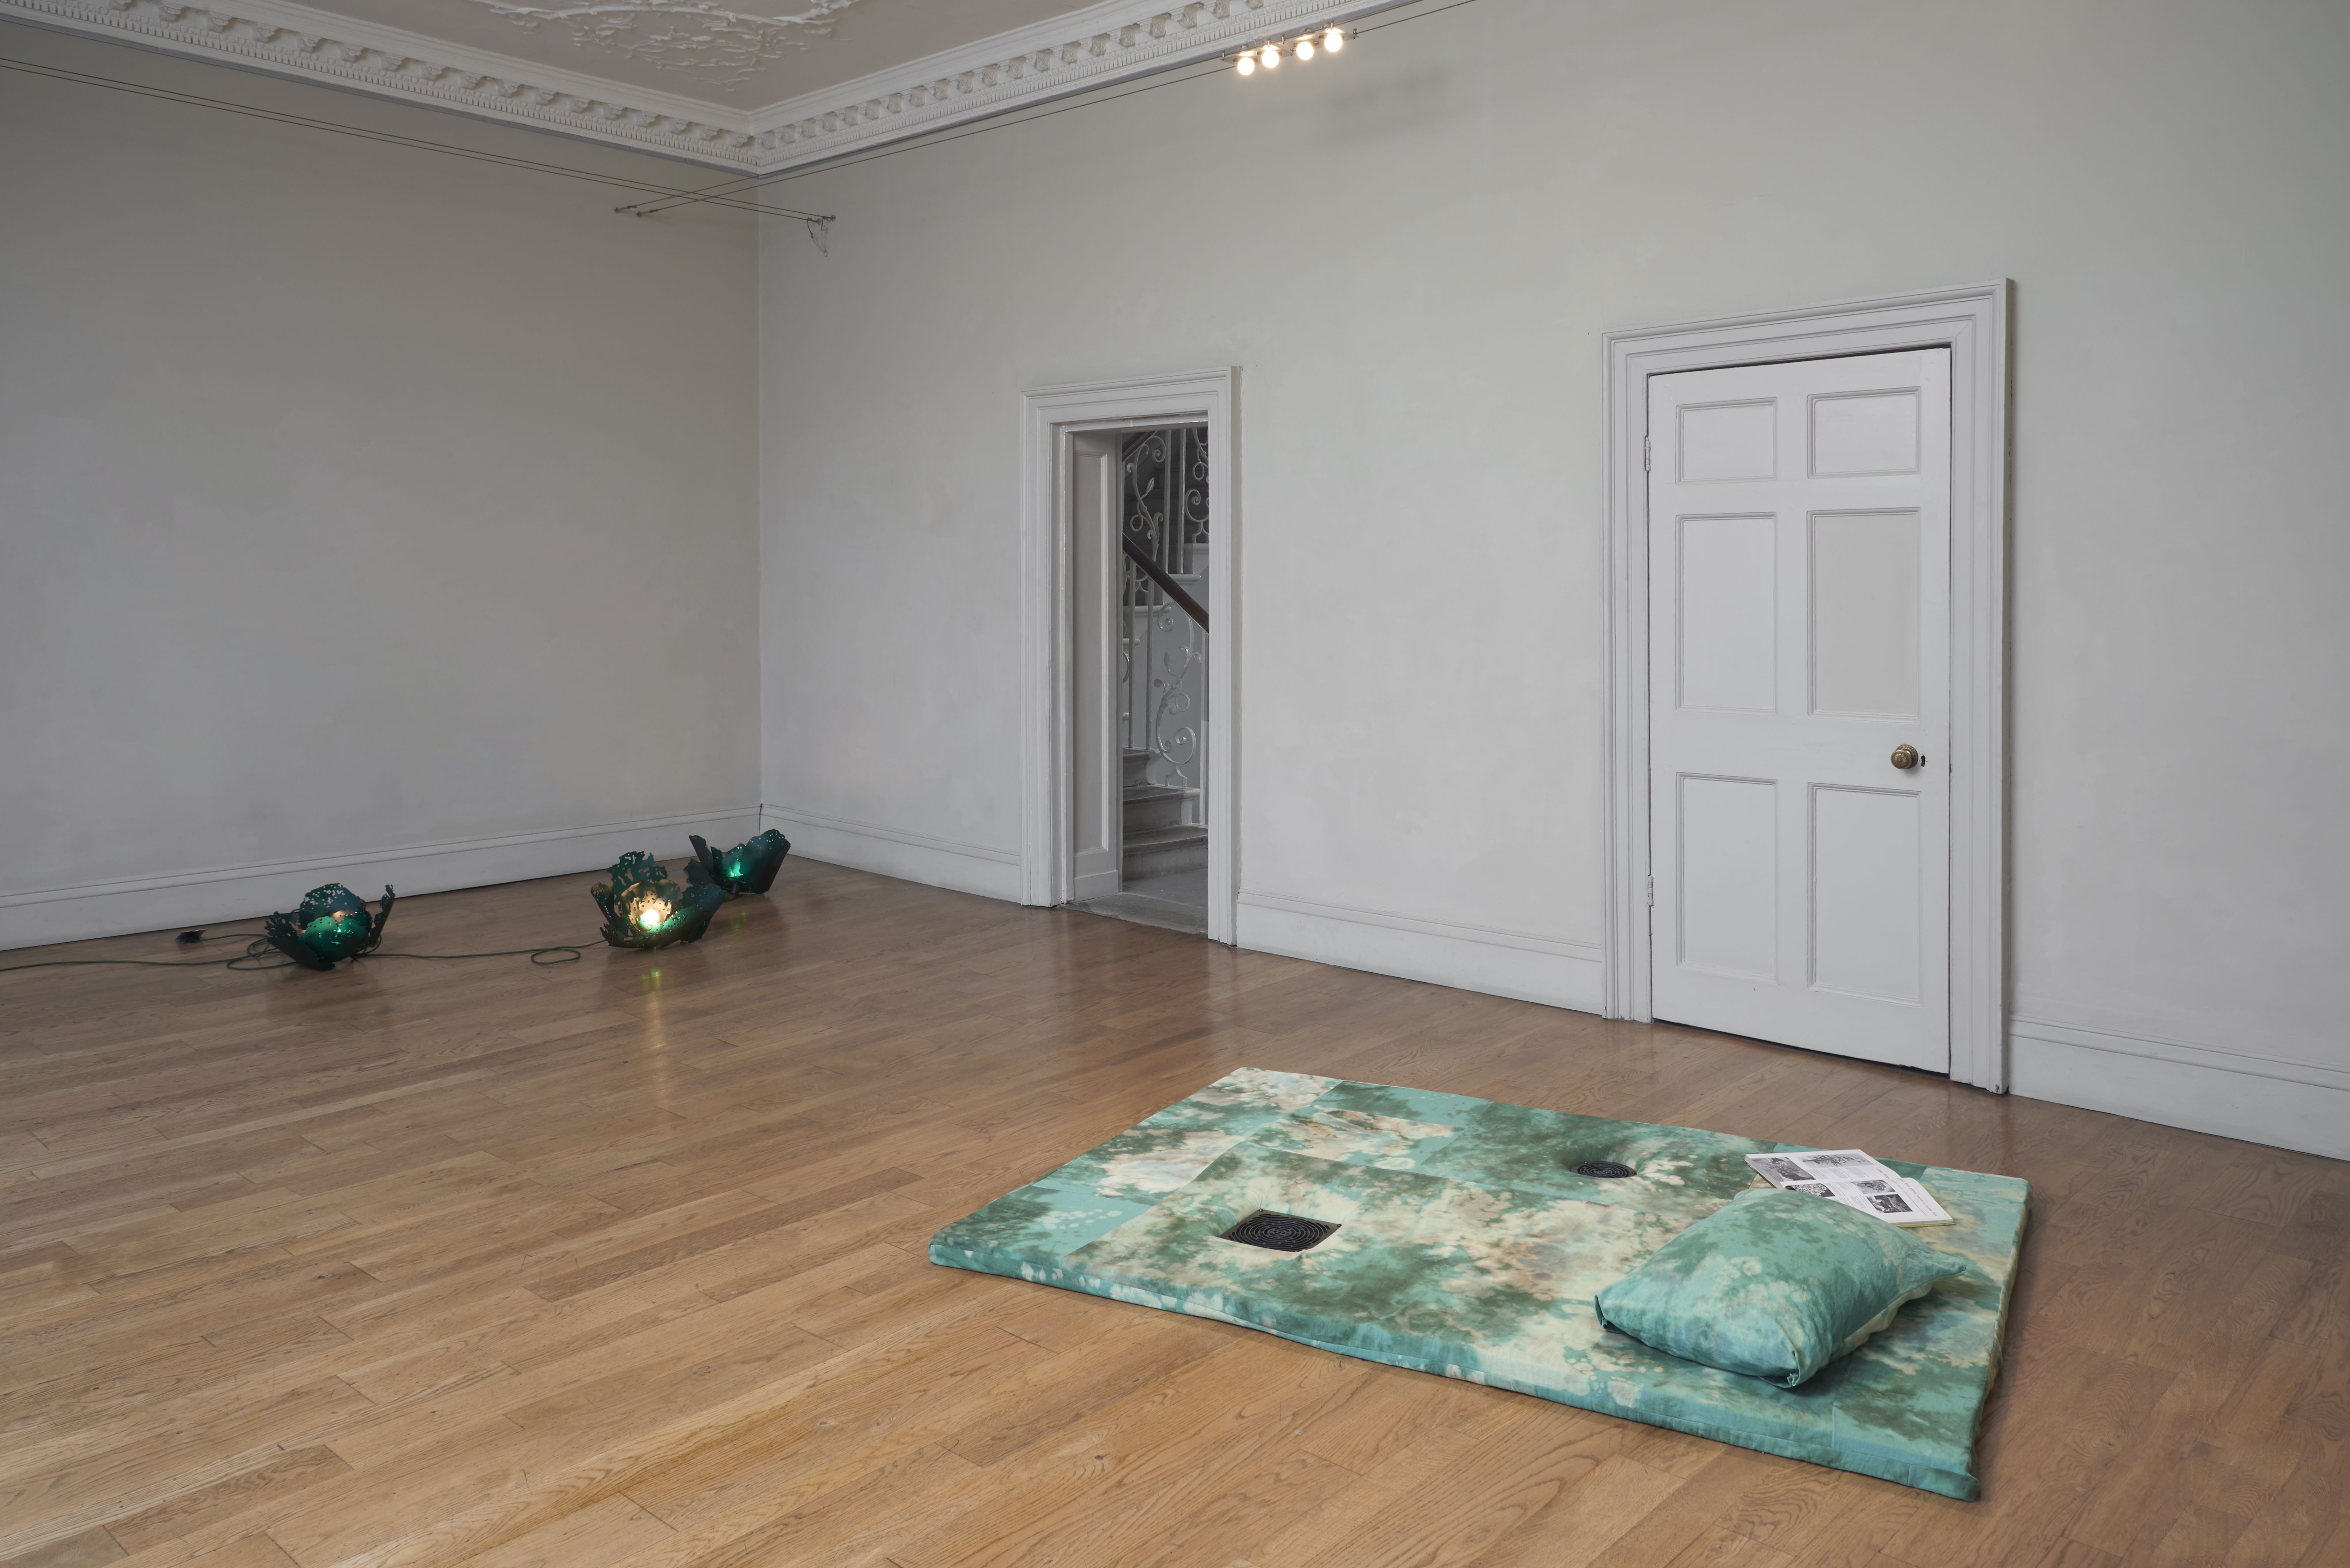 Rachel Adams 'Brassica' (group) frost acrylic, electric cable, metal fixings 36×45×45 cm, 2022 and 'Mildew' dyed and bleached linen, memory foam, mild steel, pillow 140×200×20 cm, 2022, installation photography by Andy Keate